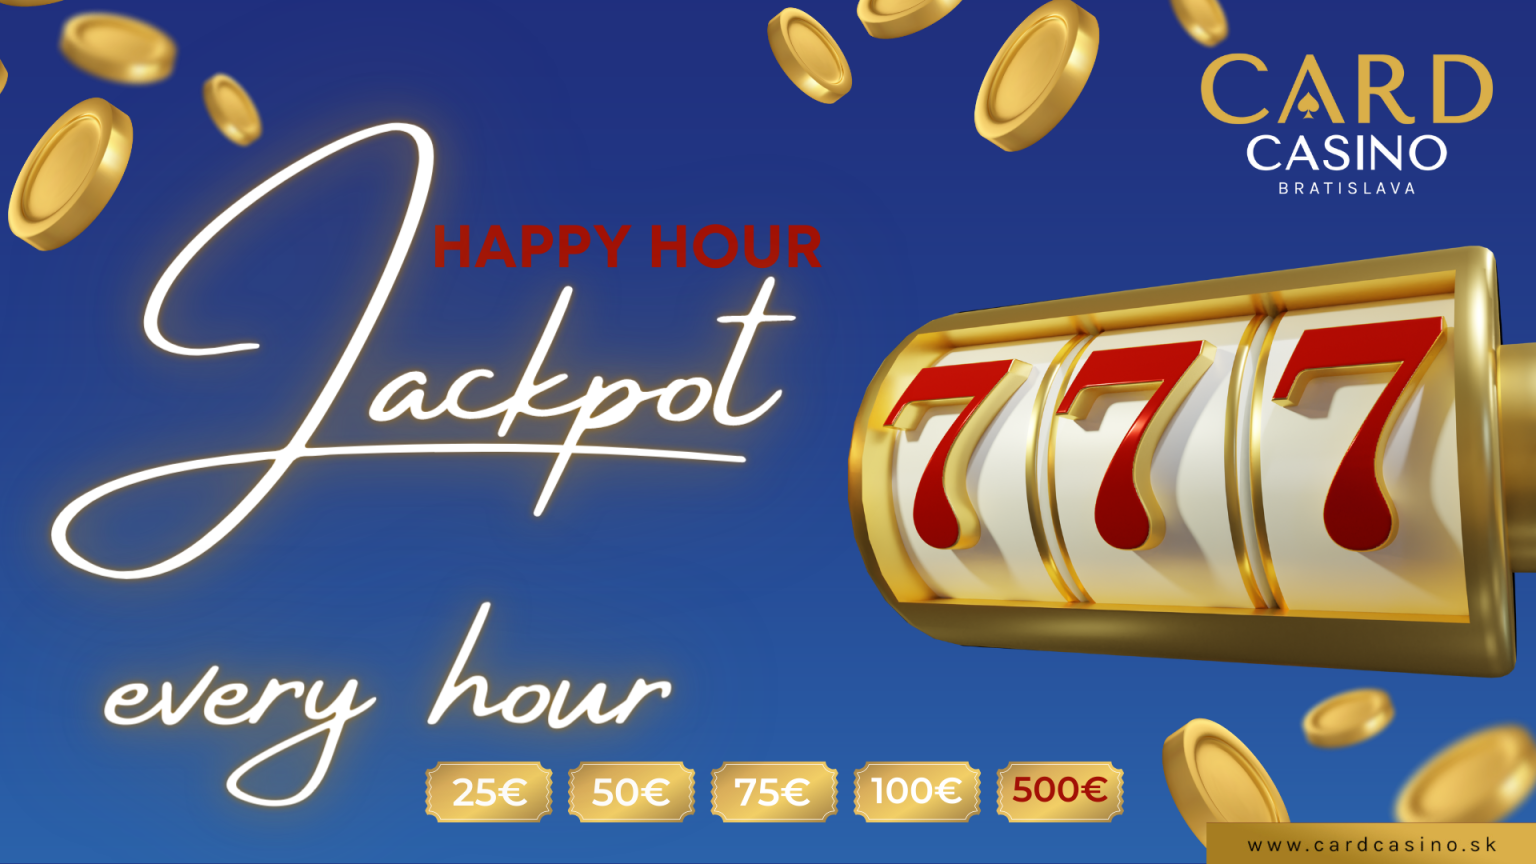 The end of generosity? Oh, no! In January we will give away €35,000 in jackpots